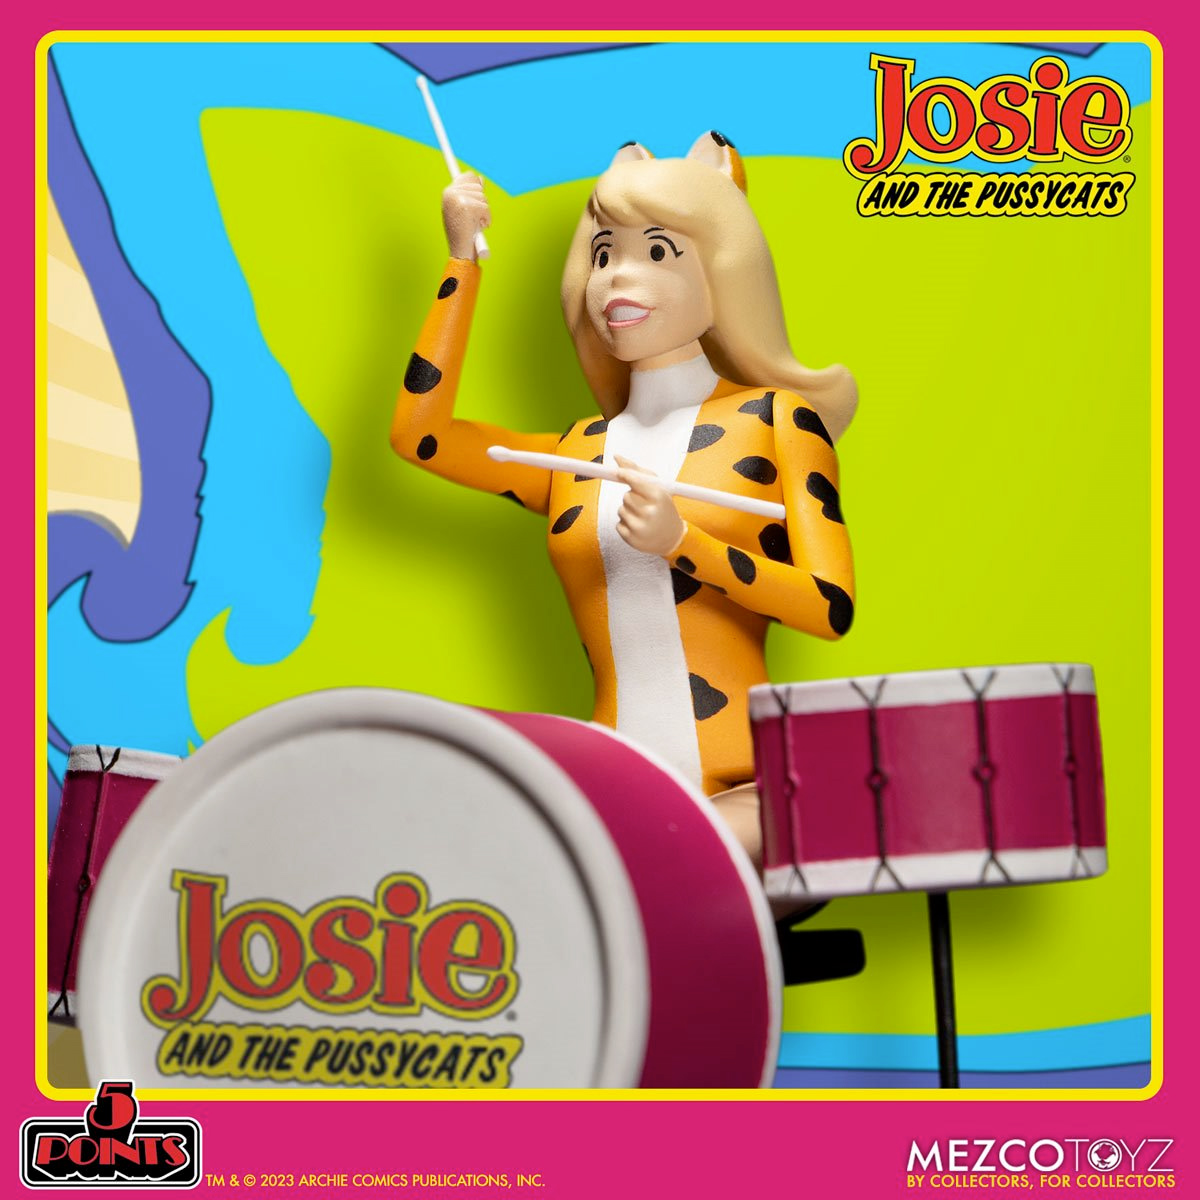 Action Figures Josie and the Pussycats 5 Points Mezco (Archie/Hanna-Barbera)